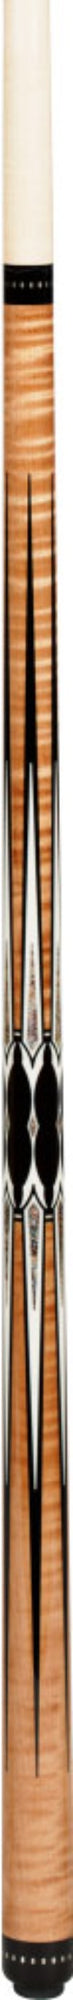 Pechauer PL-23 Limited Edition Pool Cue Pool Cue